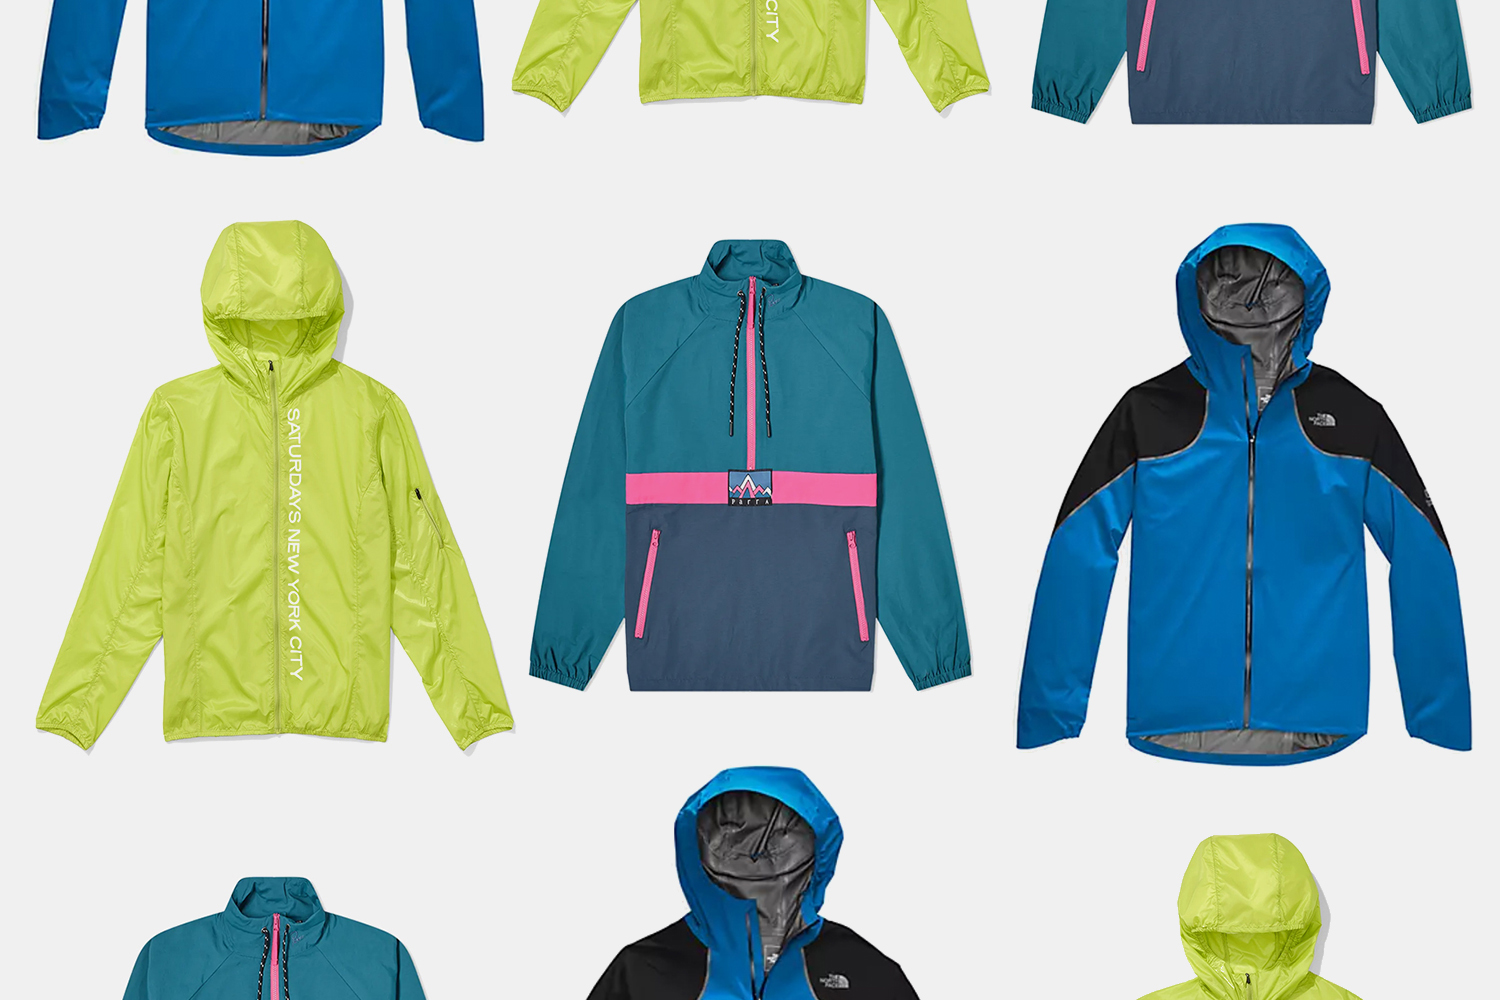 10 Windbreakers for Running or Just Hanging Out in This Spring - InsideHook